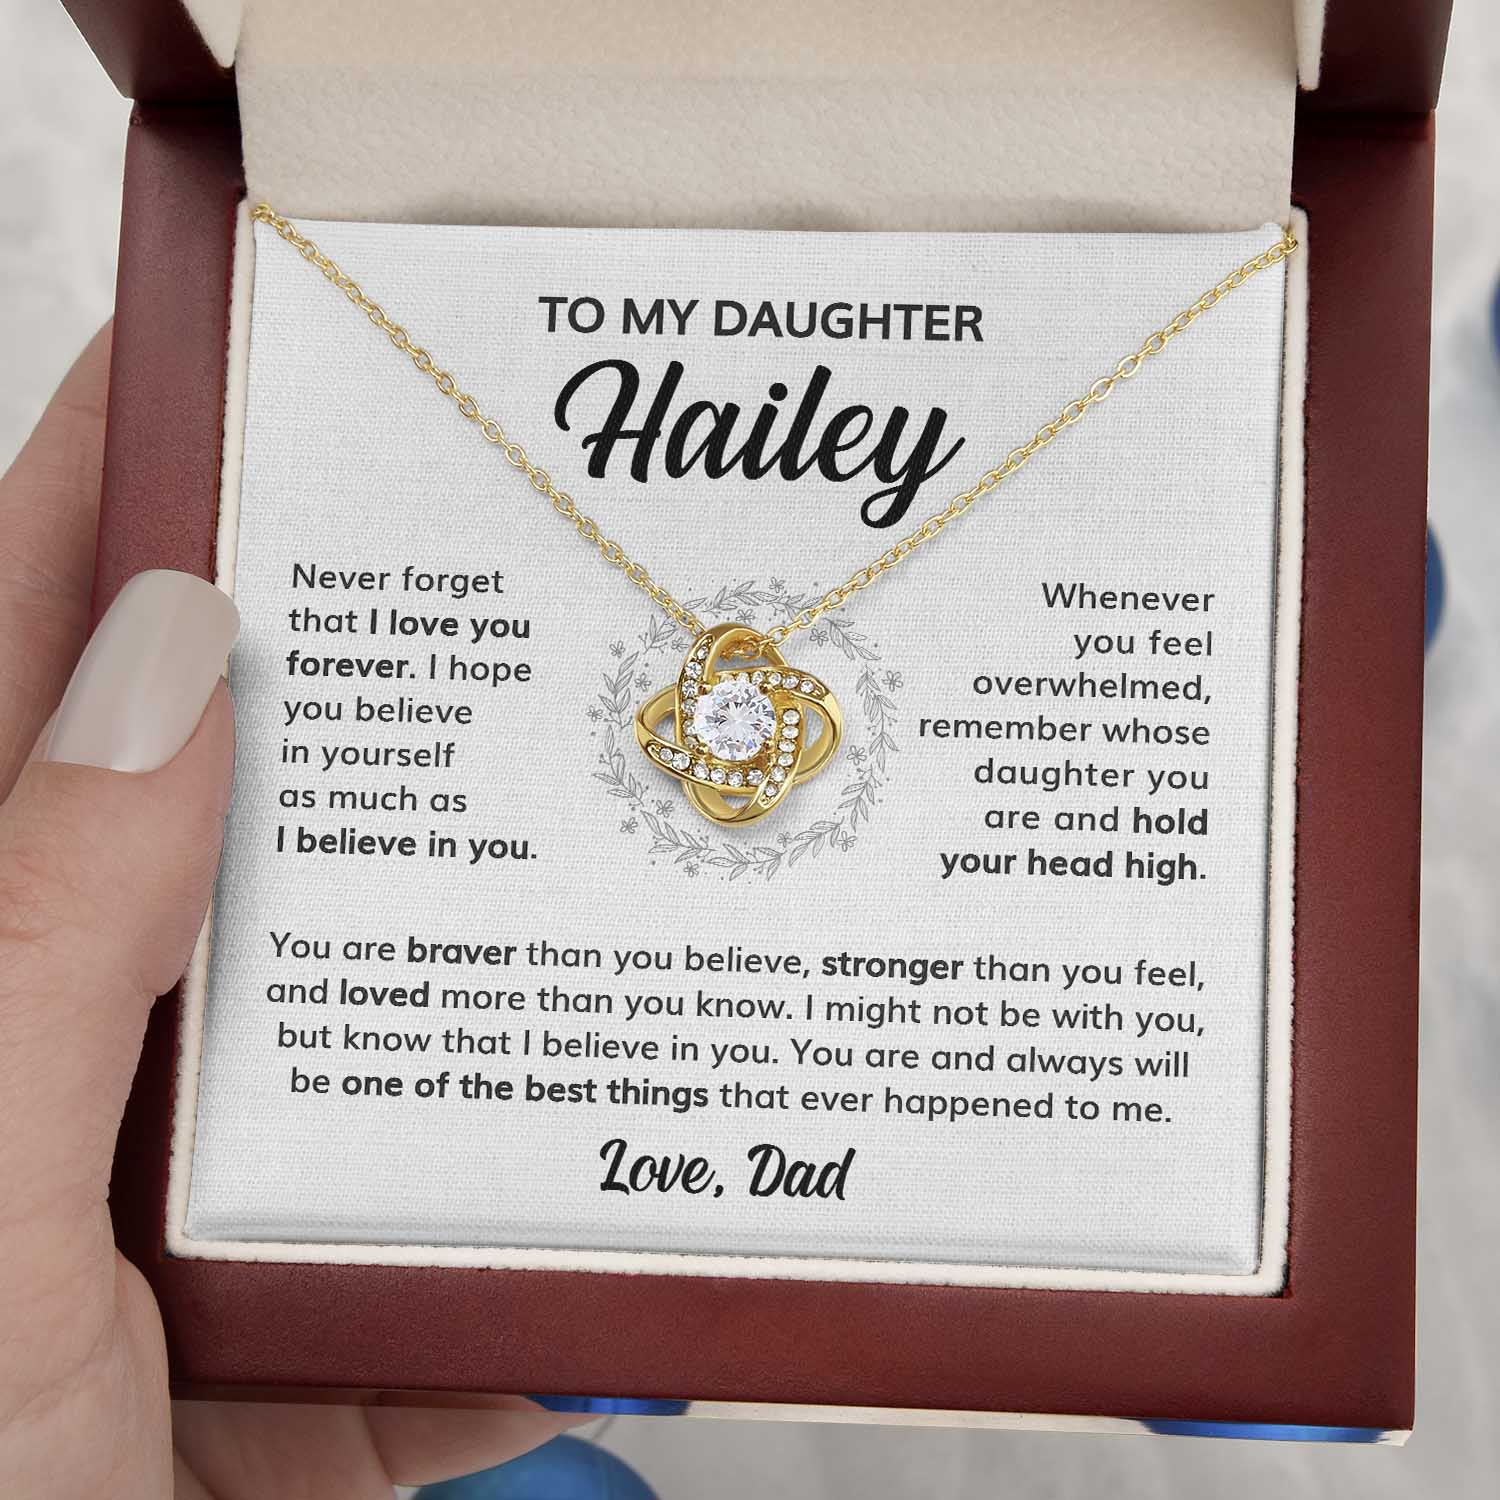 ShineOn Fulfillment Jewelry 18K Yellow Gold Finish / Luxury Box To my Daughter Custom Message Card - Hold your Head High - Love Knot